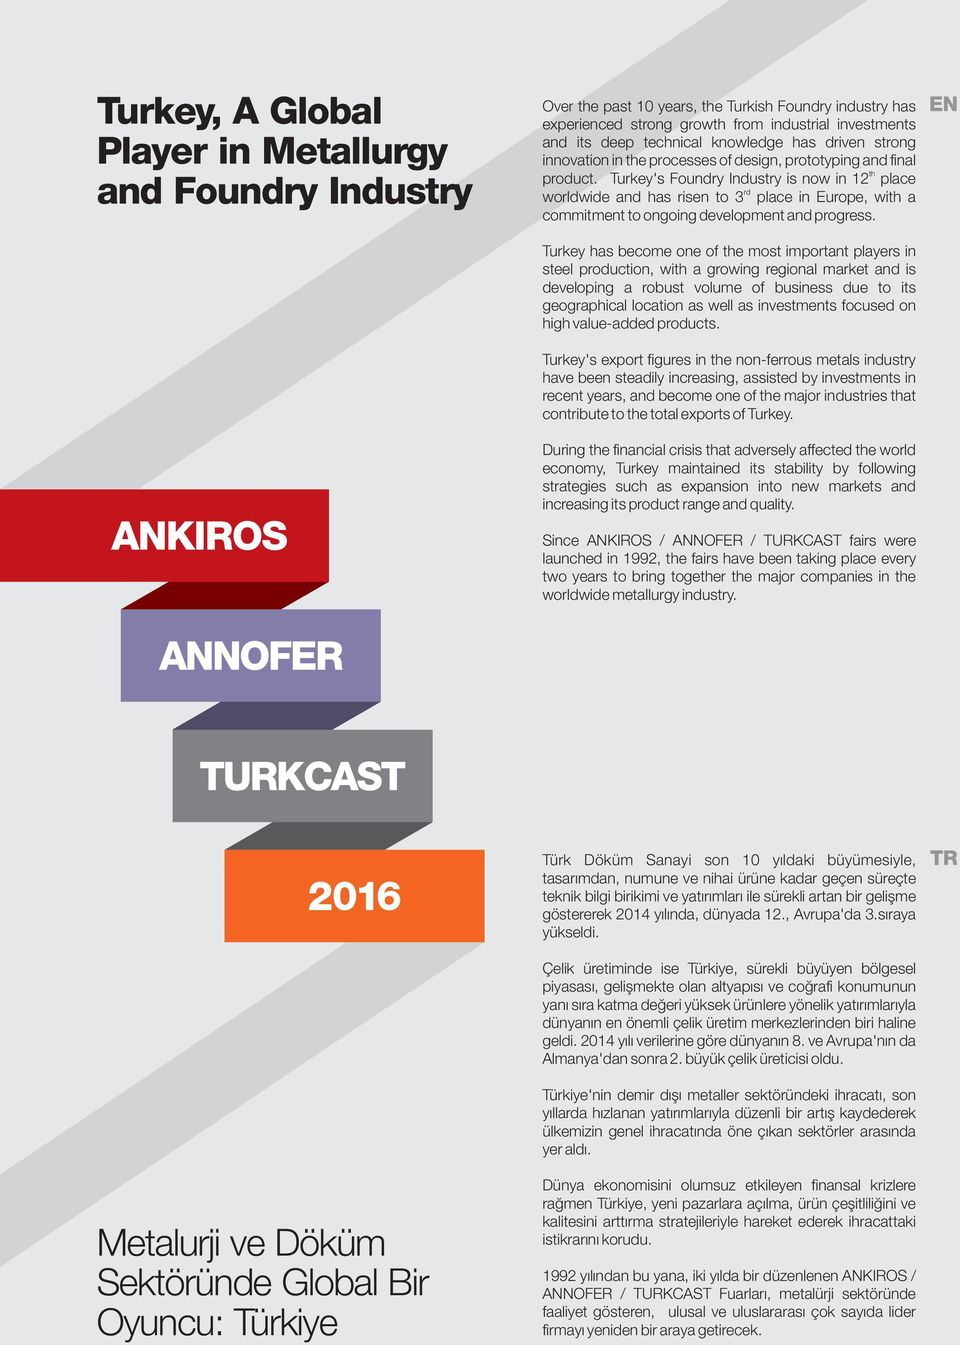 Turkey's Foundry Industry is now in 12 place rd worldwide and has risen to 3 place in Europe, with a commitment to ongoing development and progress.